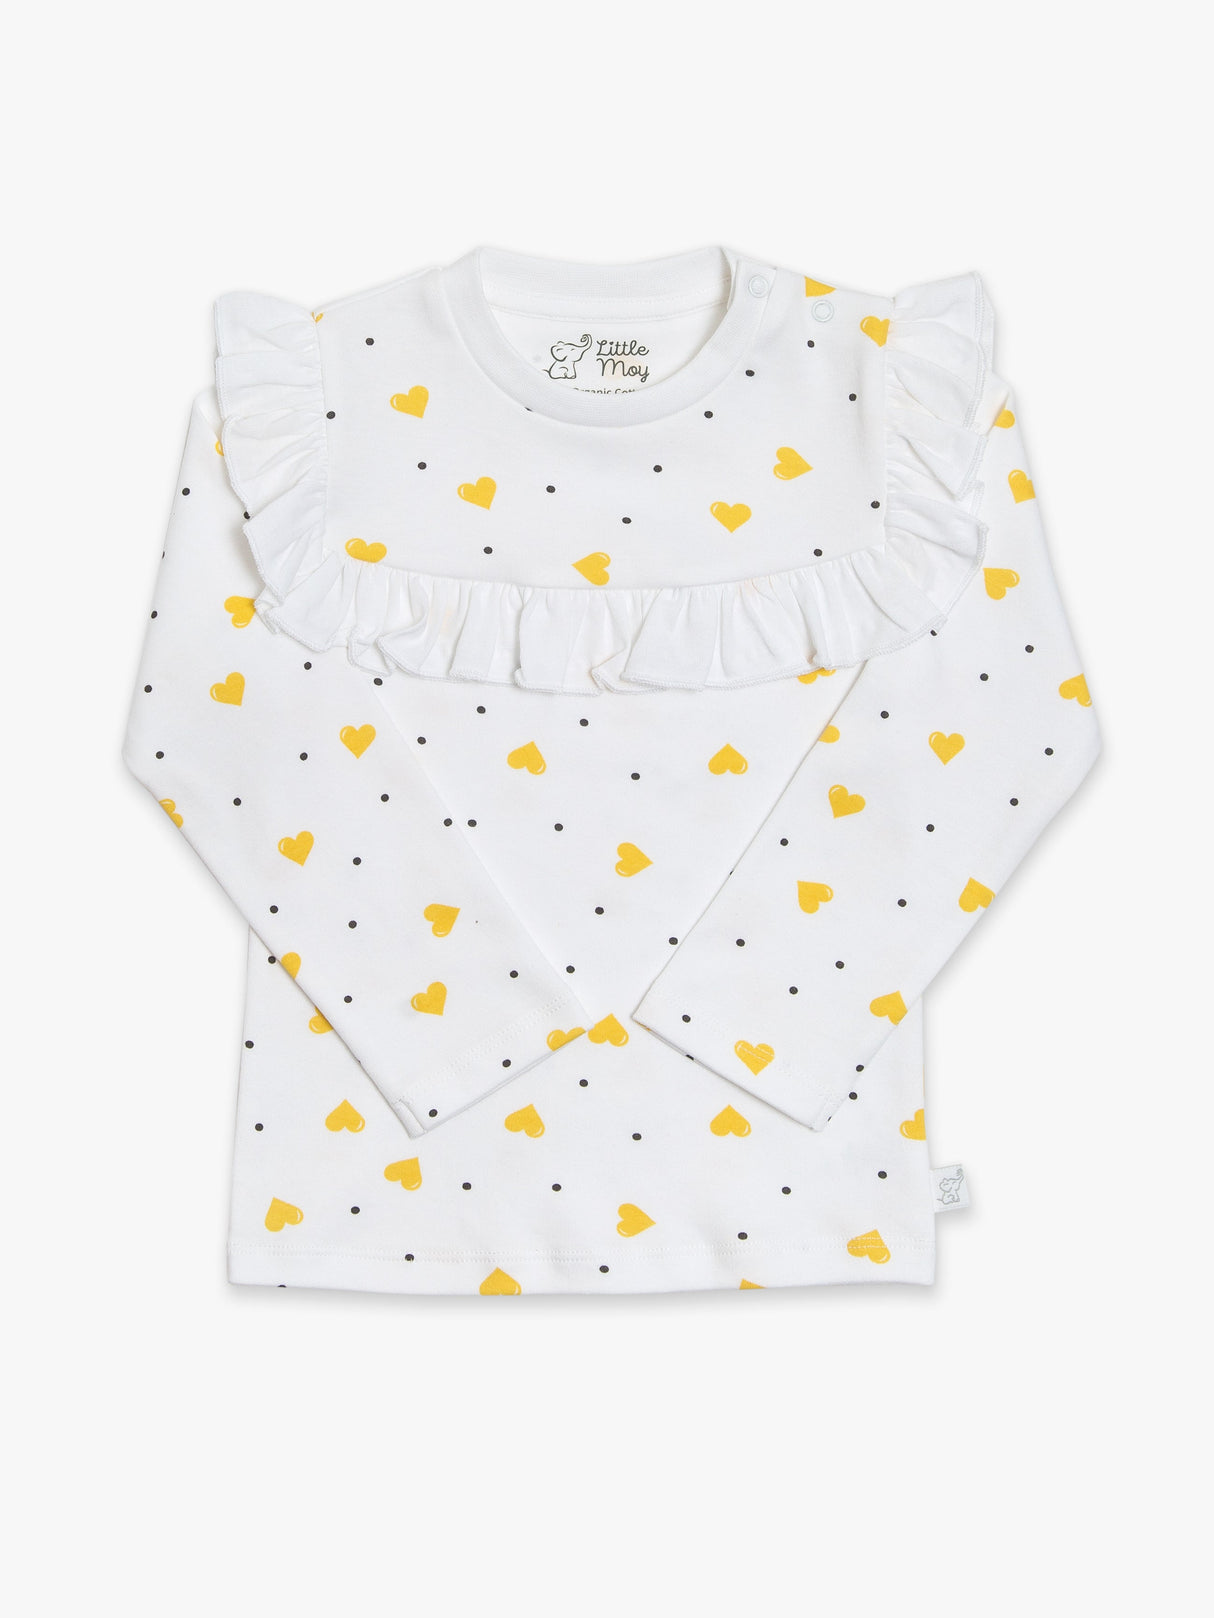 Athena Ruffled Tee - Yellow Hearts by Little Moy